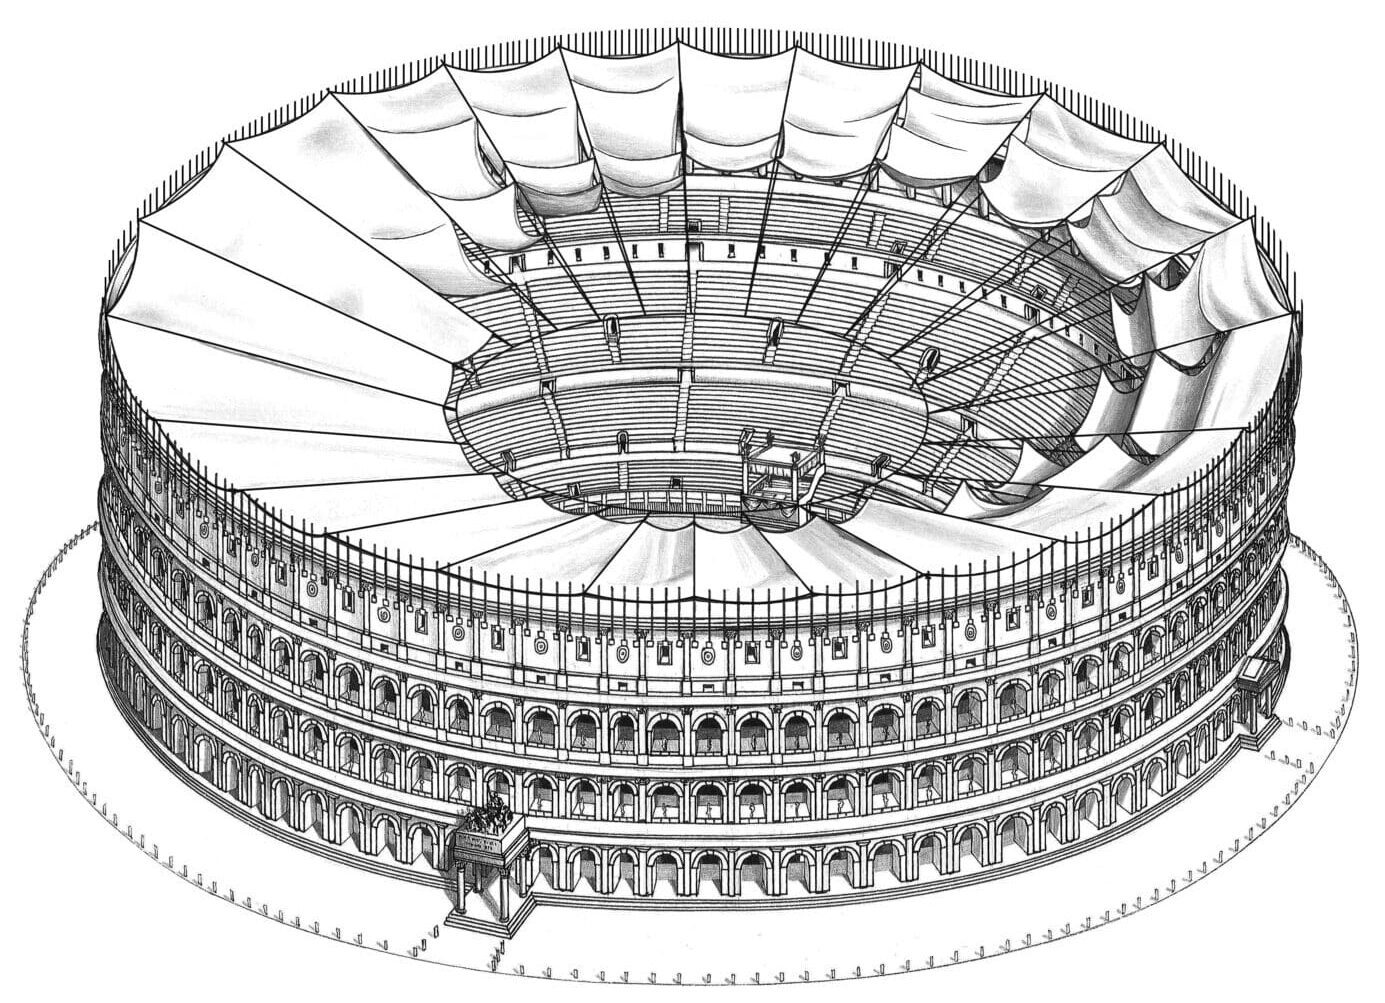 Illustration of the Colosseum in the 1st century AD complete with velarium (awning)